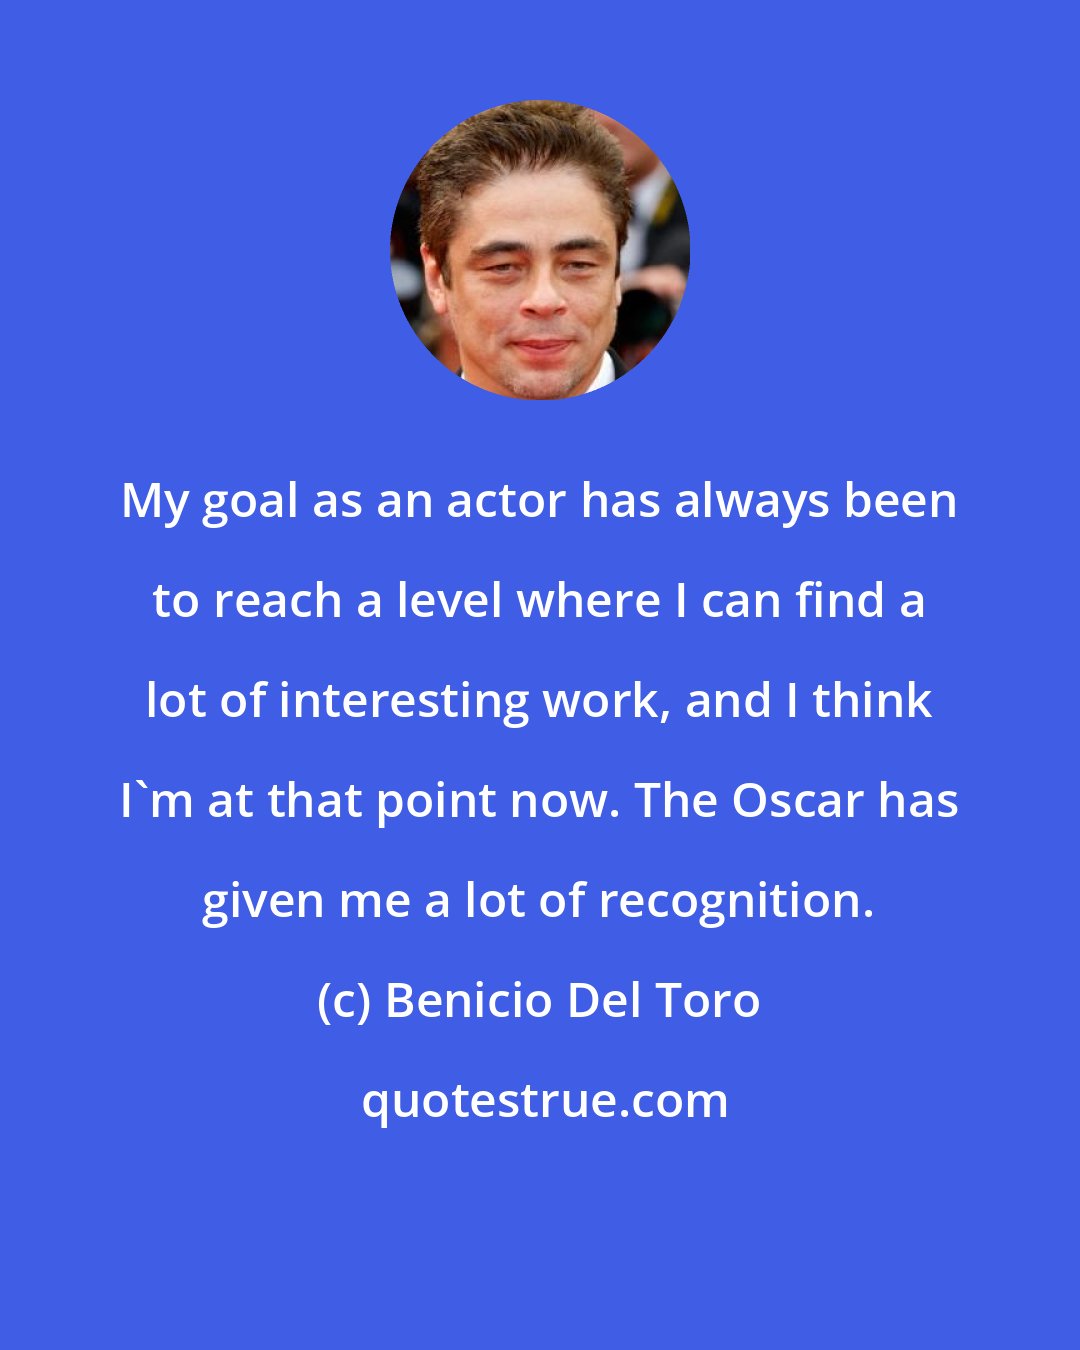 Benicio Del Toro: My goal as an actor has always been to reach a level where I can find a lot of interesting work, and I think I'm at that point now. The Oscar has given me a lot of recognition.